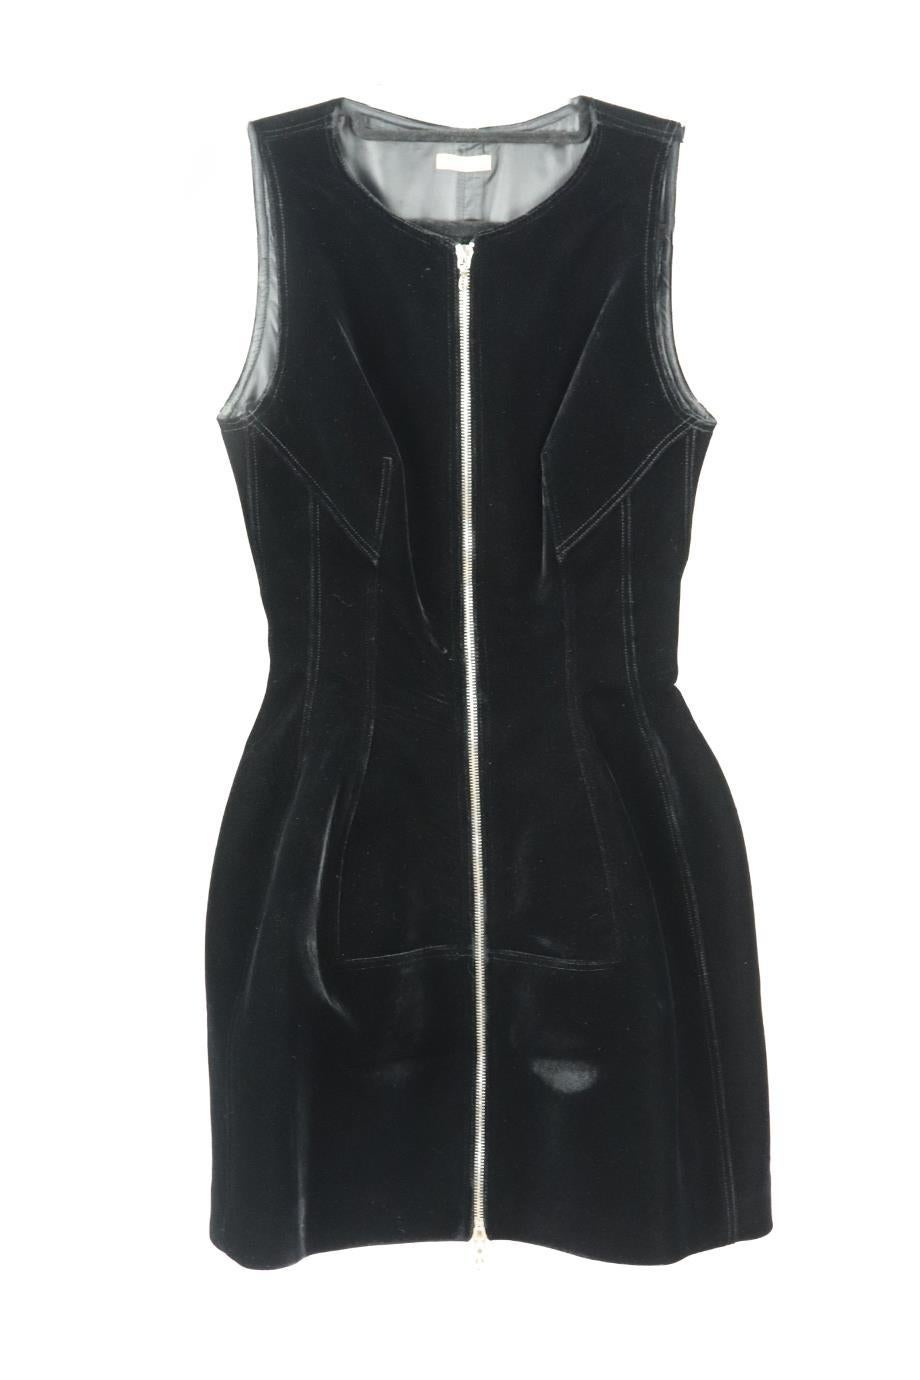 Azzedine Alaïa velvet mini dress. Black. Sleeveless, crewneck. Zip fastening at front. 65% Rayon, 35% cupro; lining: 100% polyester. Size: FR 38 (UK 10, US 6, IT 42). Bust: 31 in. Waist: 23.8 in. Hips: 47 in. Length: 31 in. Very good condition -